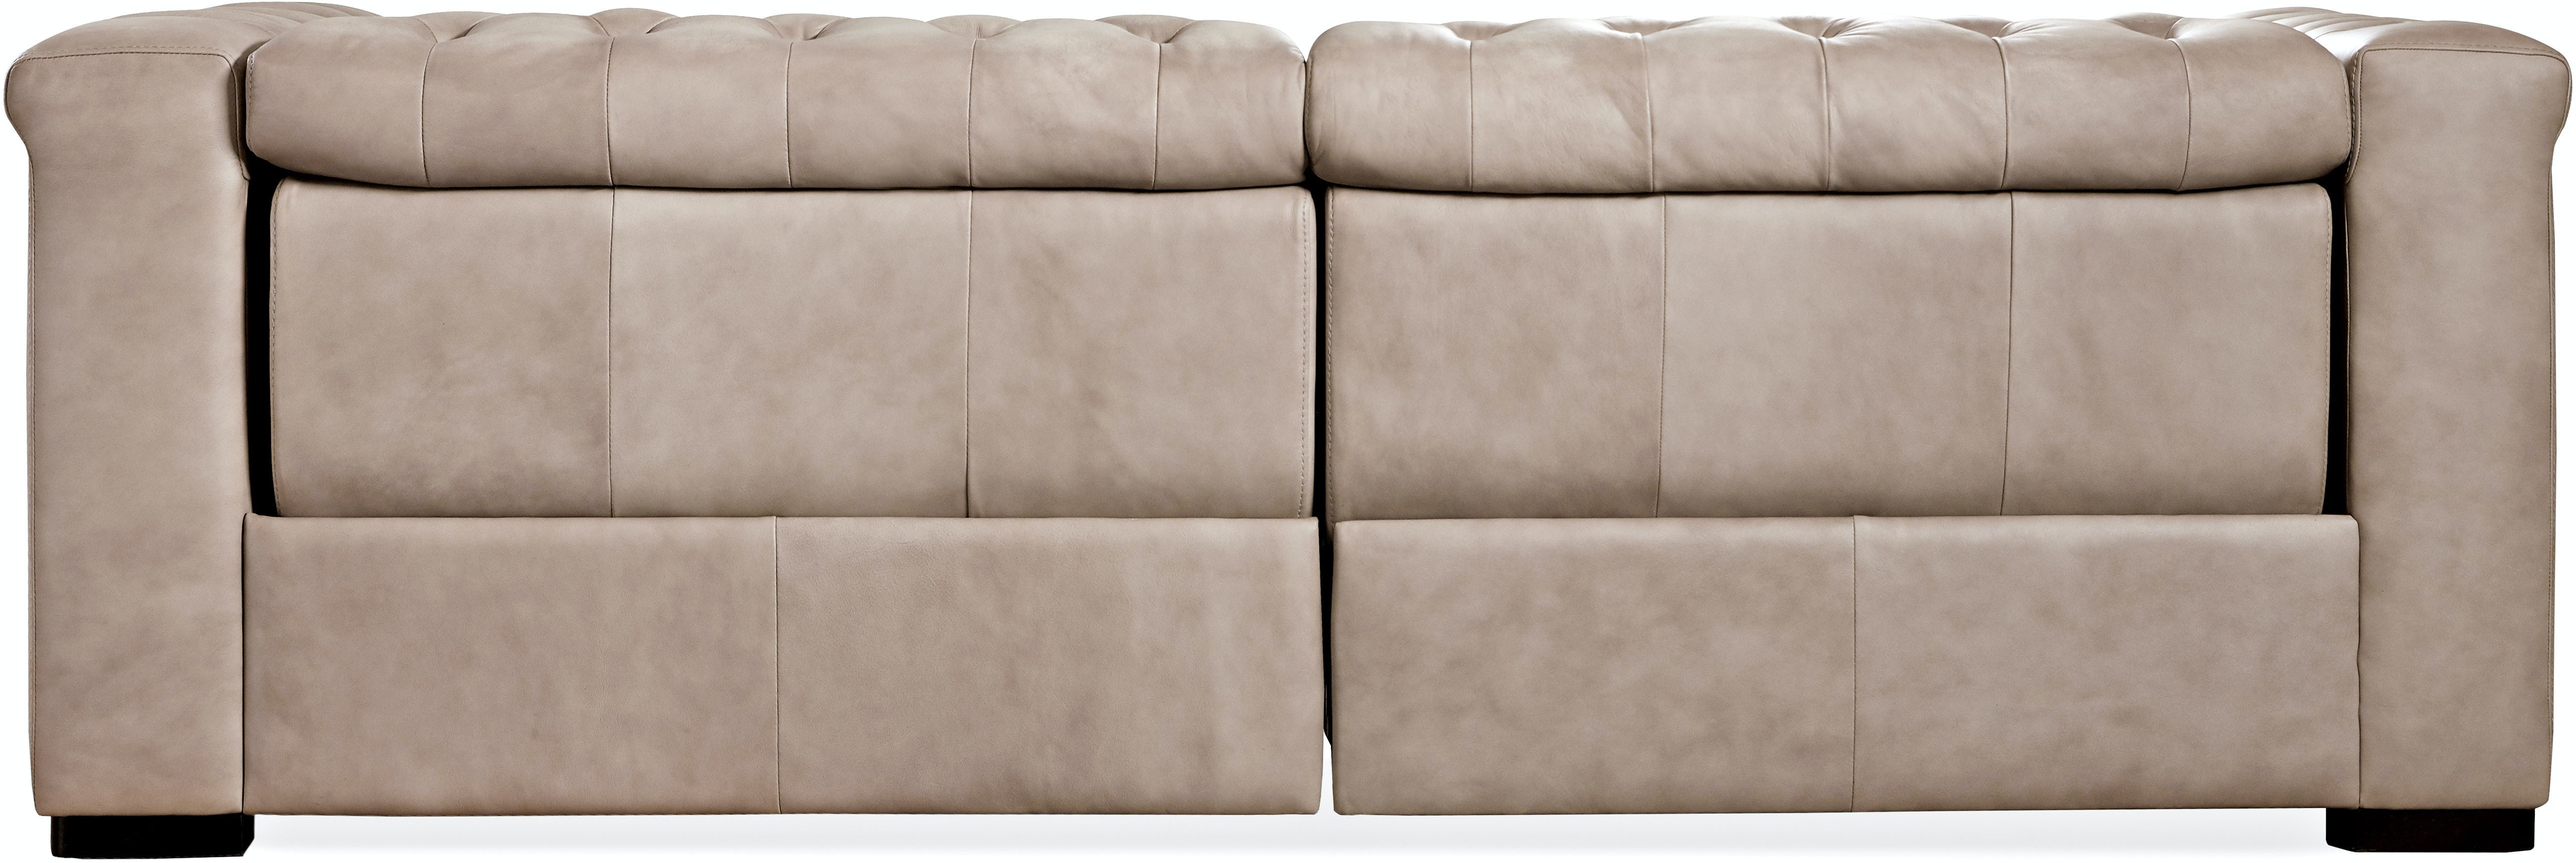 Power Recliner Sofa with Power Headrest in Brown